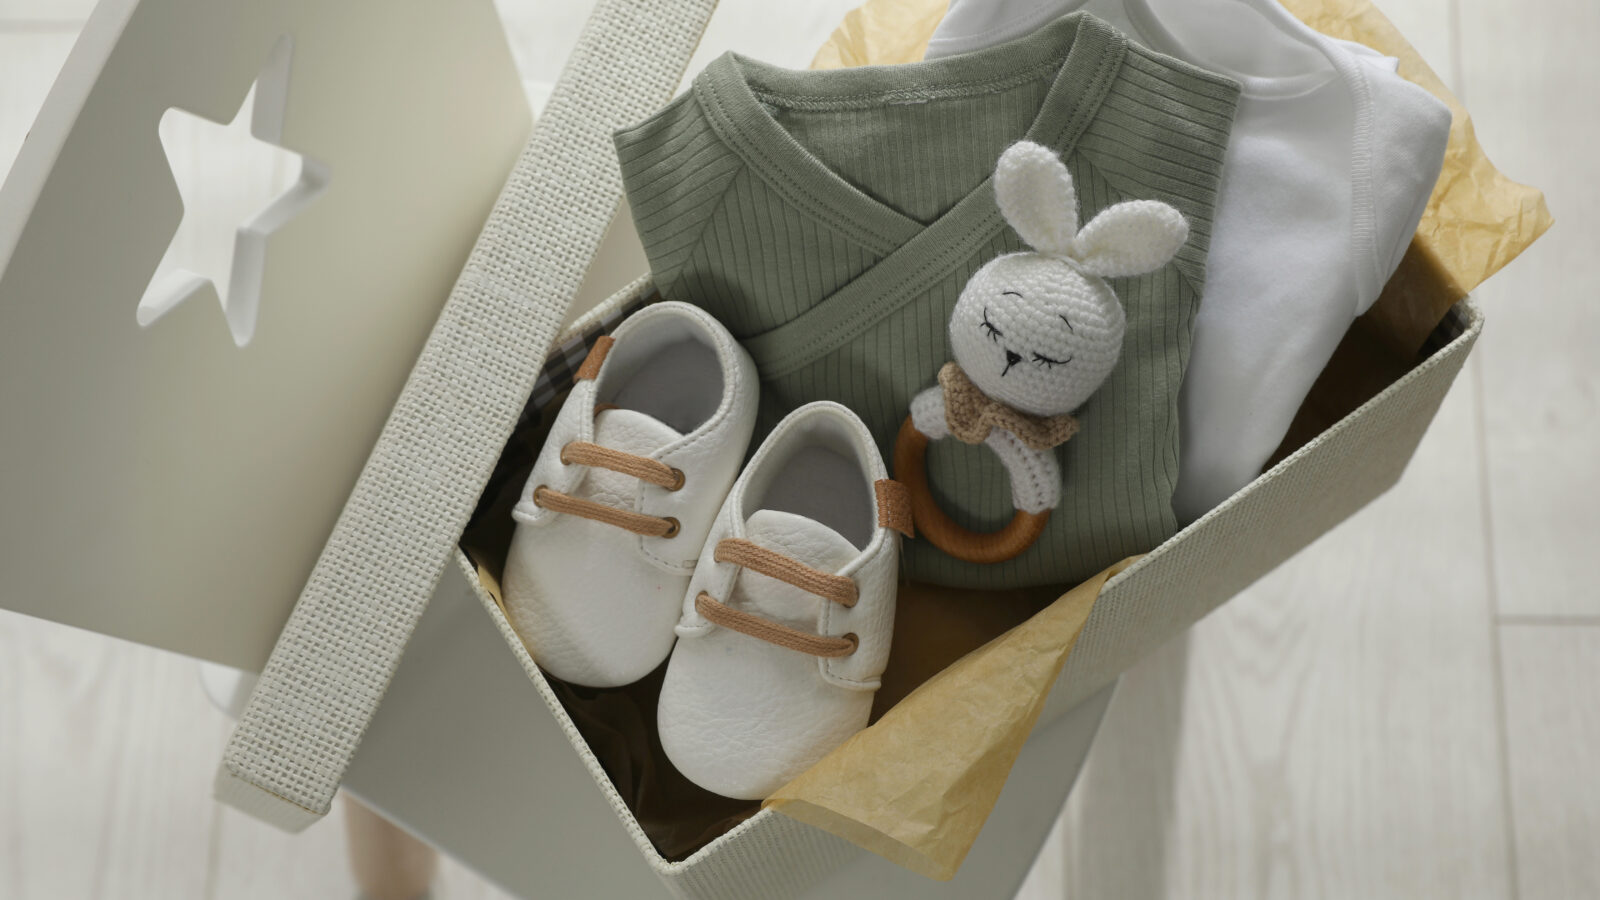 Box with baby clothes, shoes and toy on chair indoors, above vie